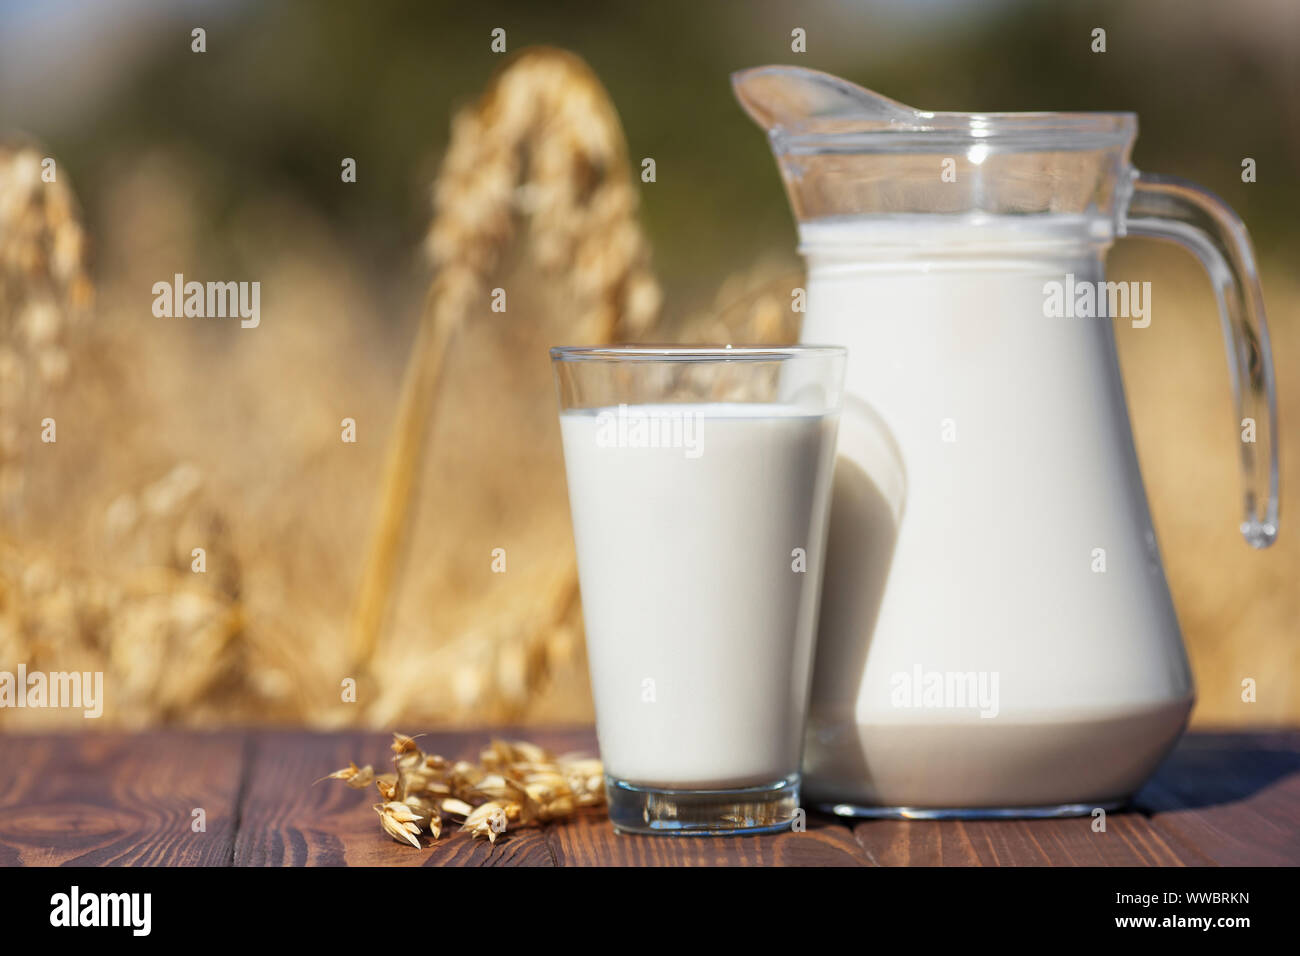 vegan oat milk in glass and jug on table over against ripe cereal field Stock Photo